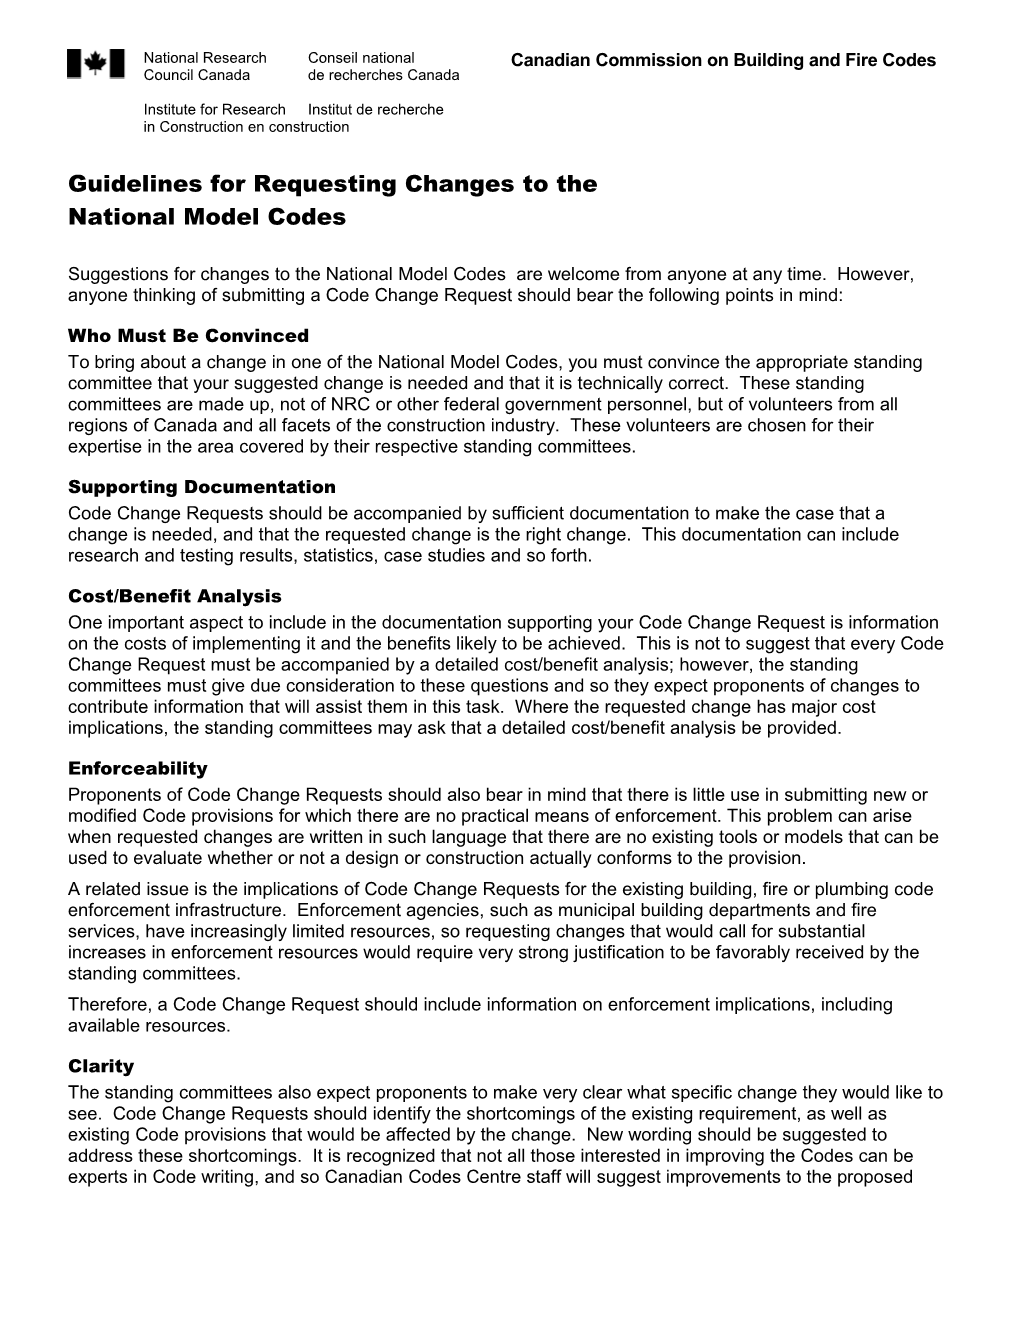 Guidelines for Proposing Changes to The